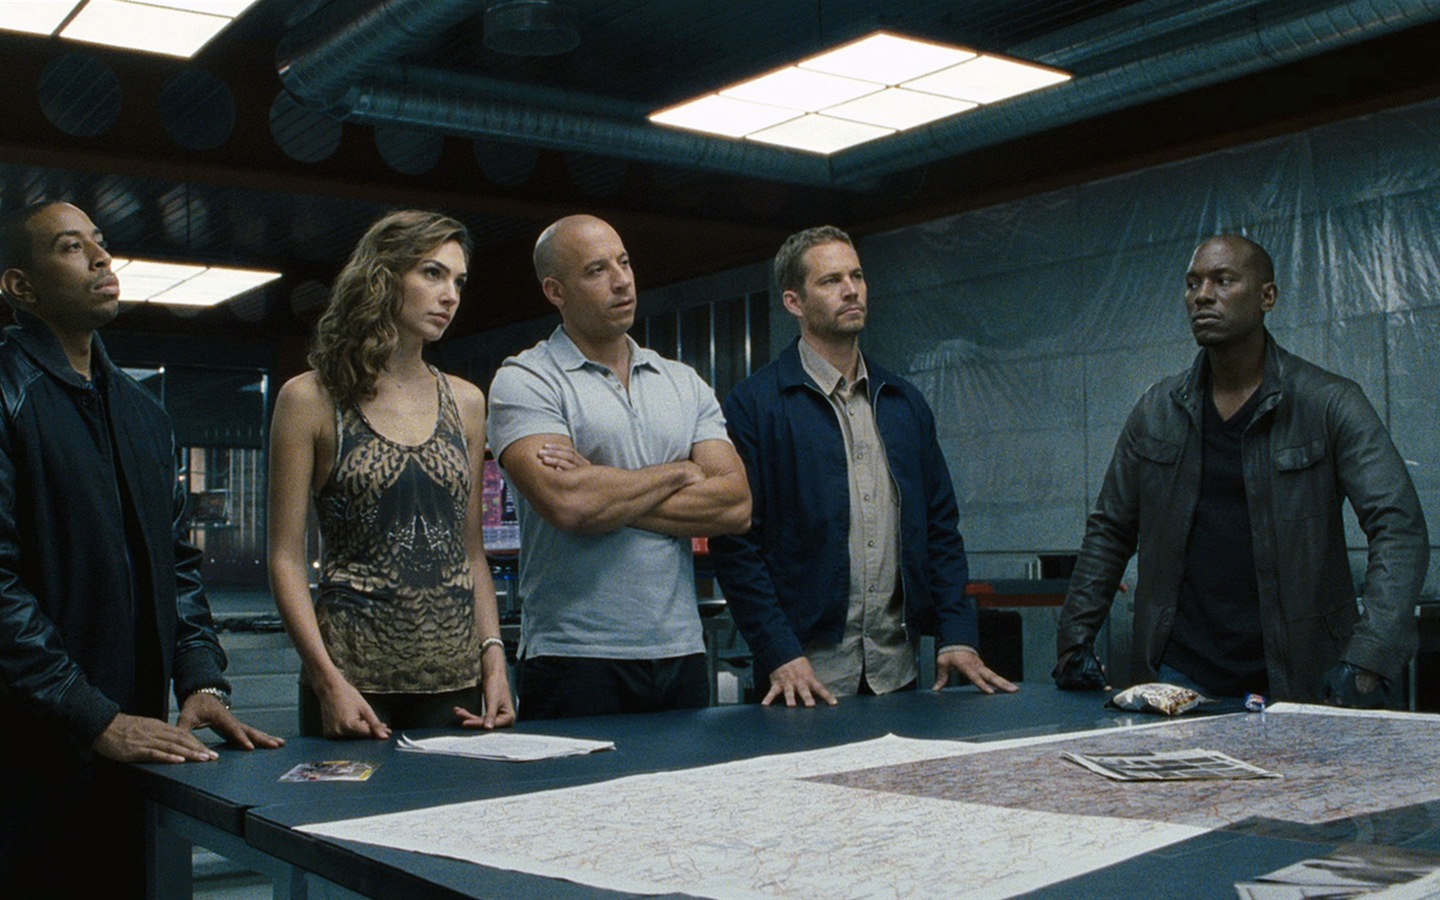 Fast And Furious 6 HD movie wallpapers #2 - 1440x900